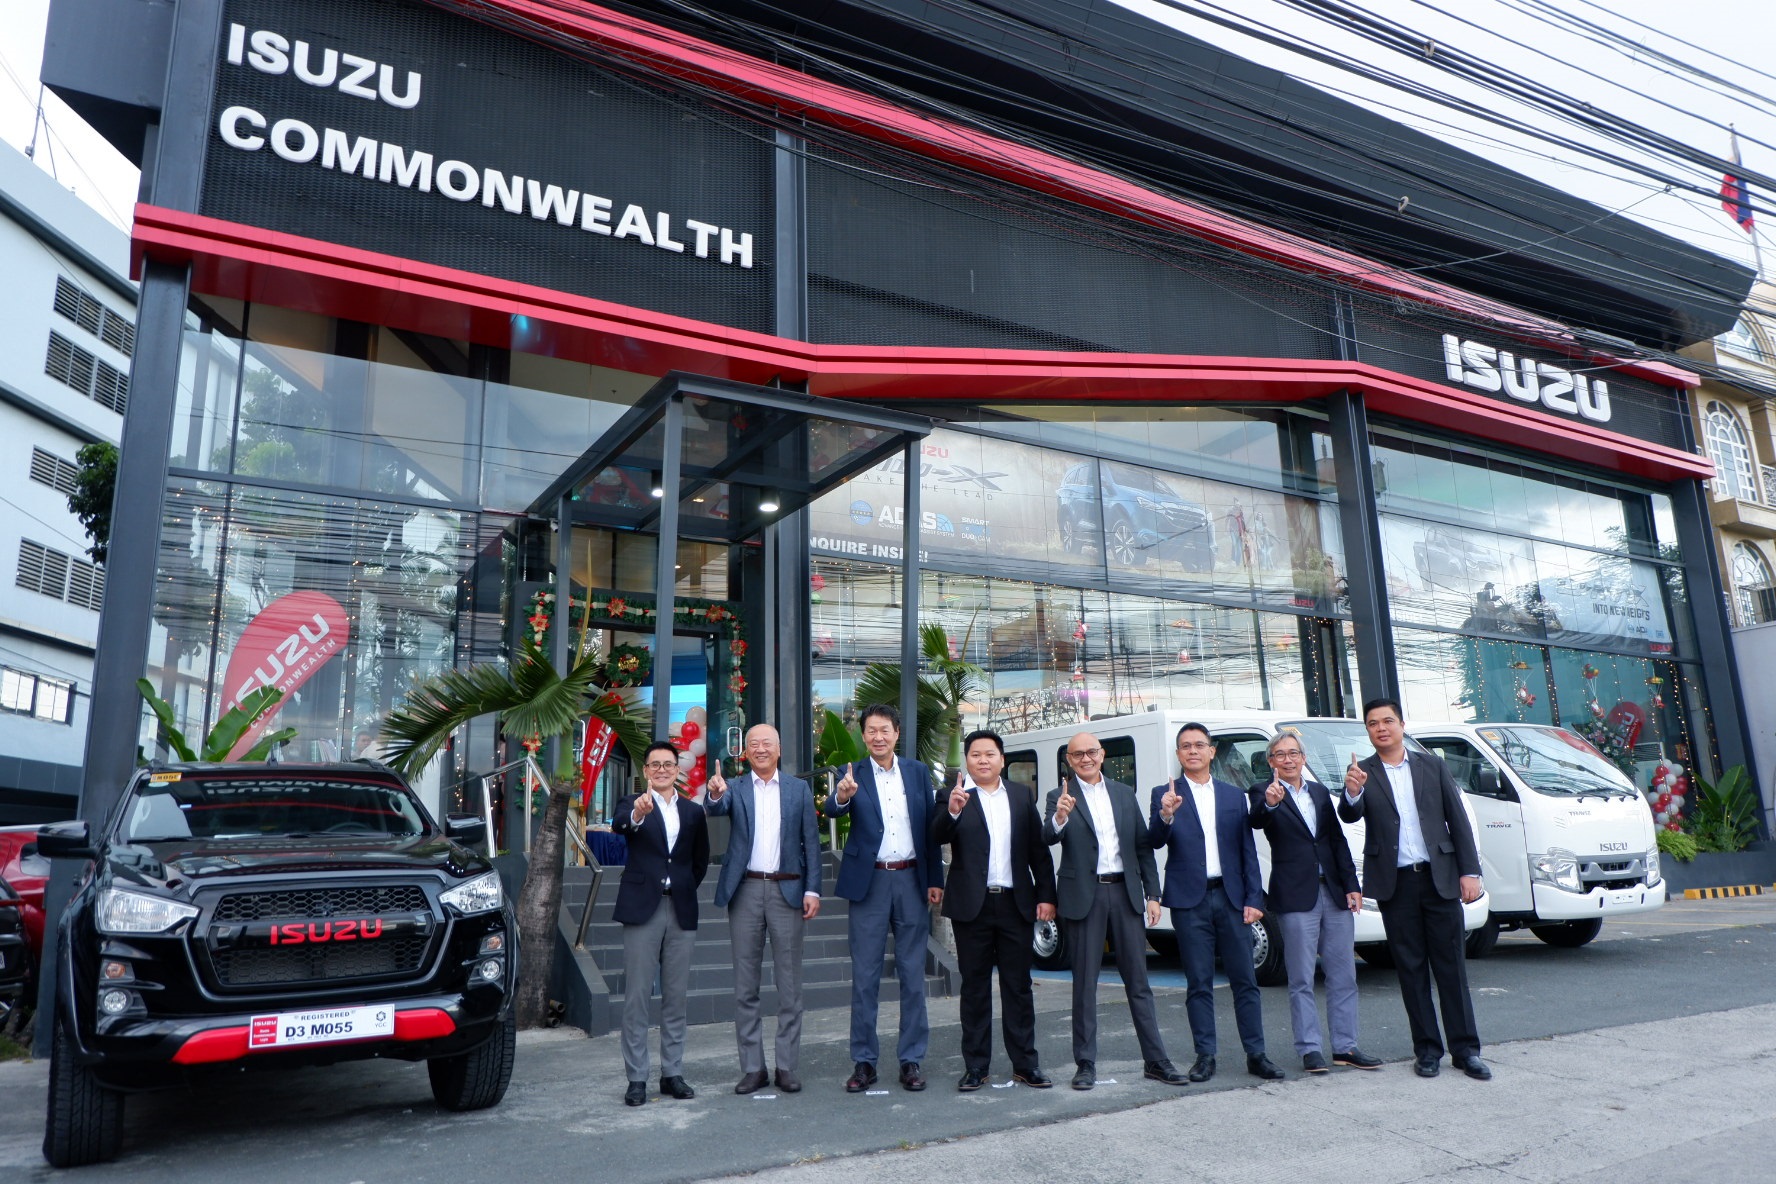 Isuzu Commonwealth celebrates Grand Reopening with new Isuzu Outlet Standards and 22nd Anniversary image